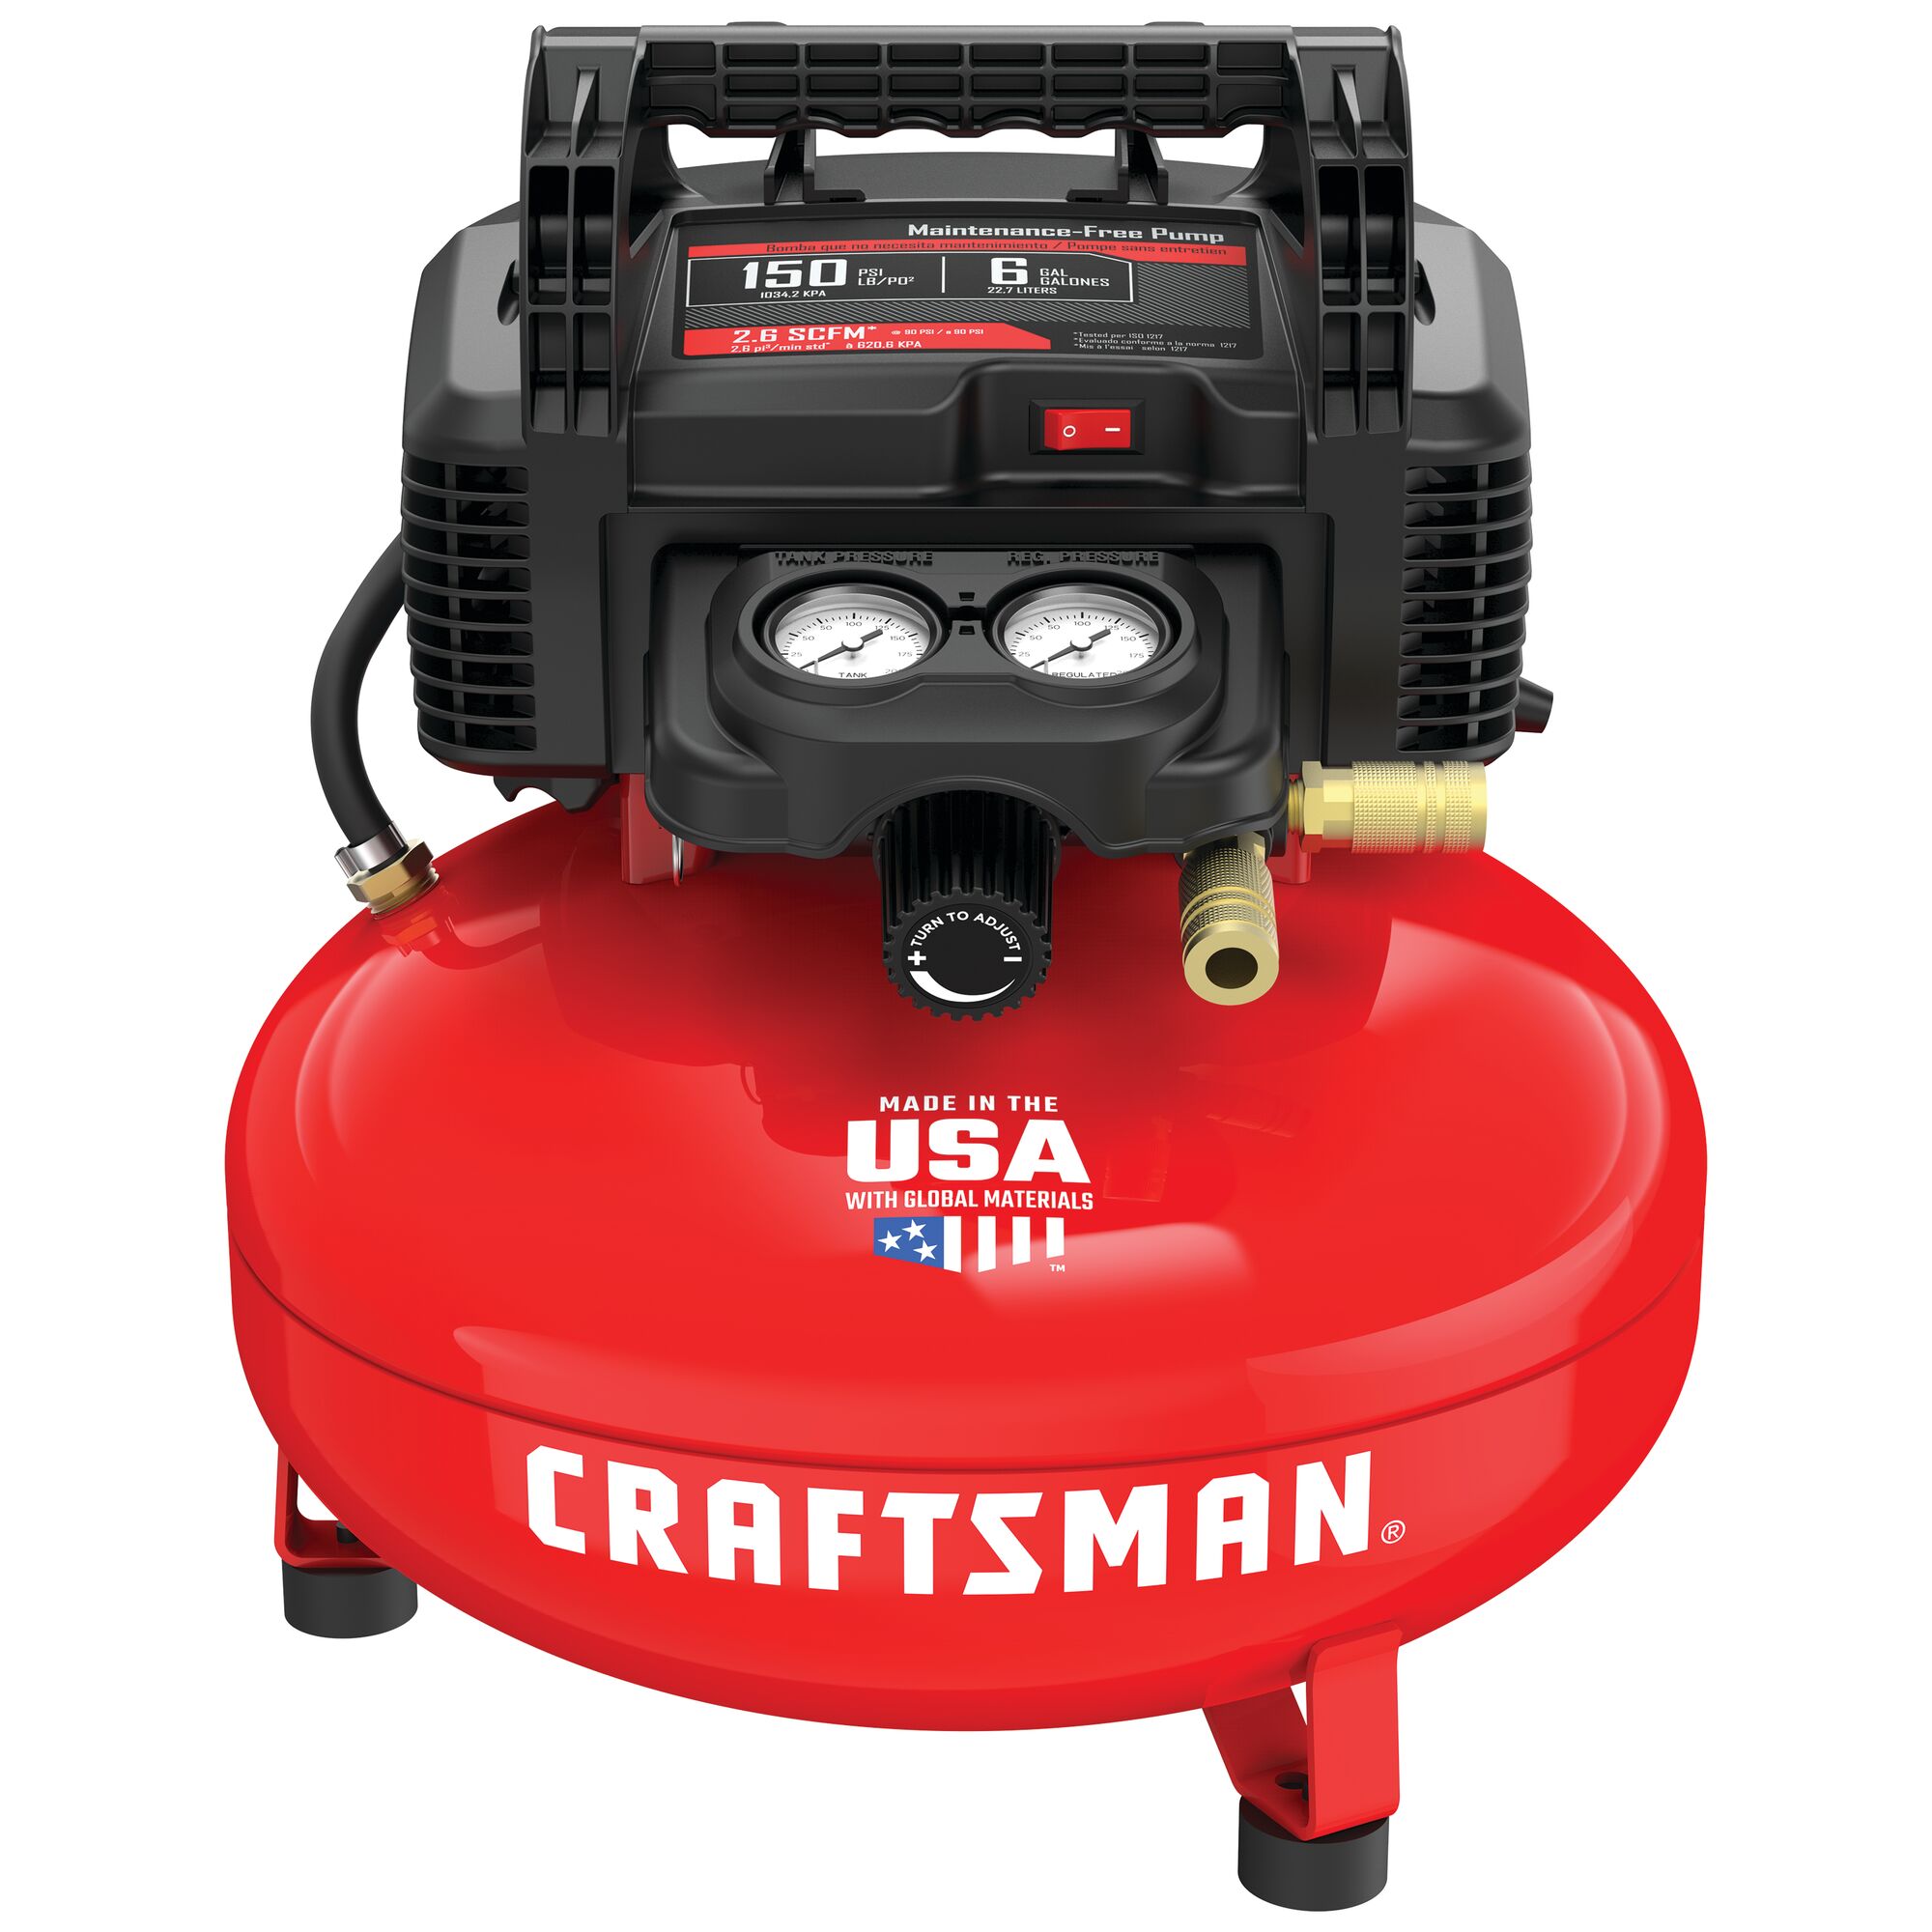 CRAFTSMAN 6-Gallons Portable 150 PSI Pancake Air Compressor in the